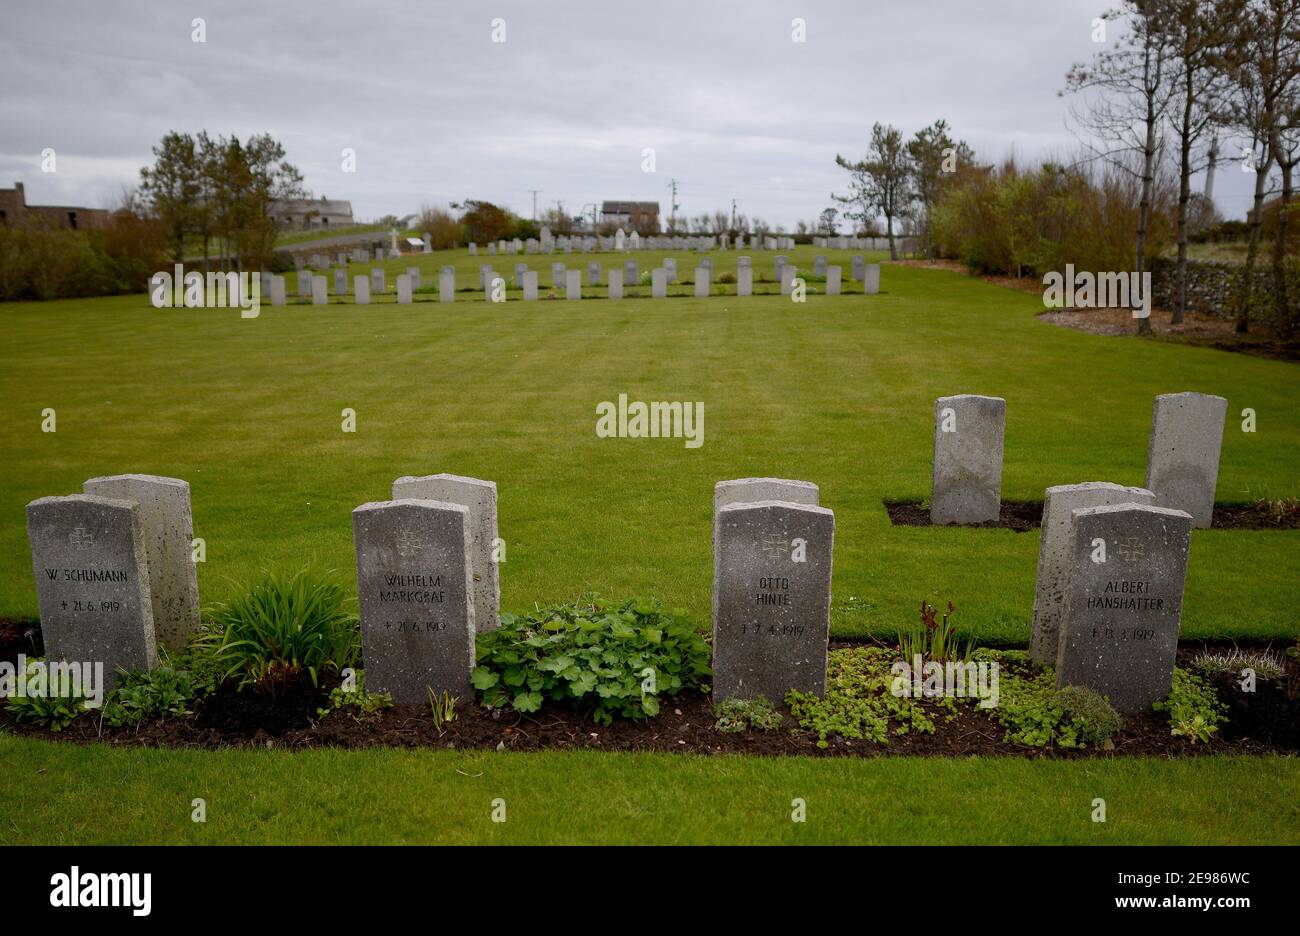 Graves of 13 German sailors at the Lyness Naval cemetery who died in the Grand Scuttle,Orkney Islands, Scotland .The Orkney Islands North of Scotland Stock Photo